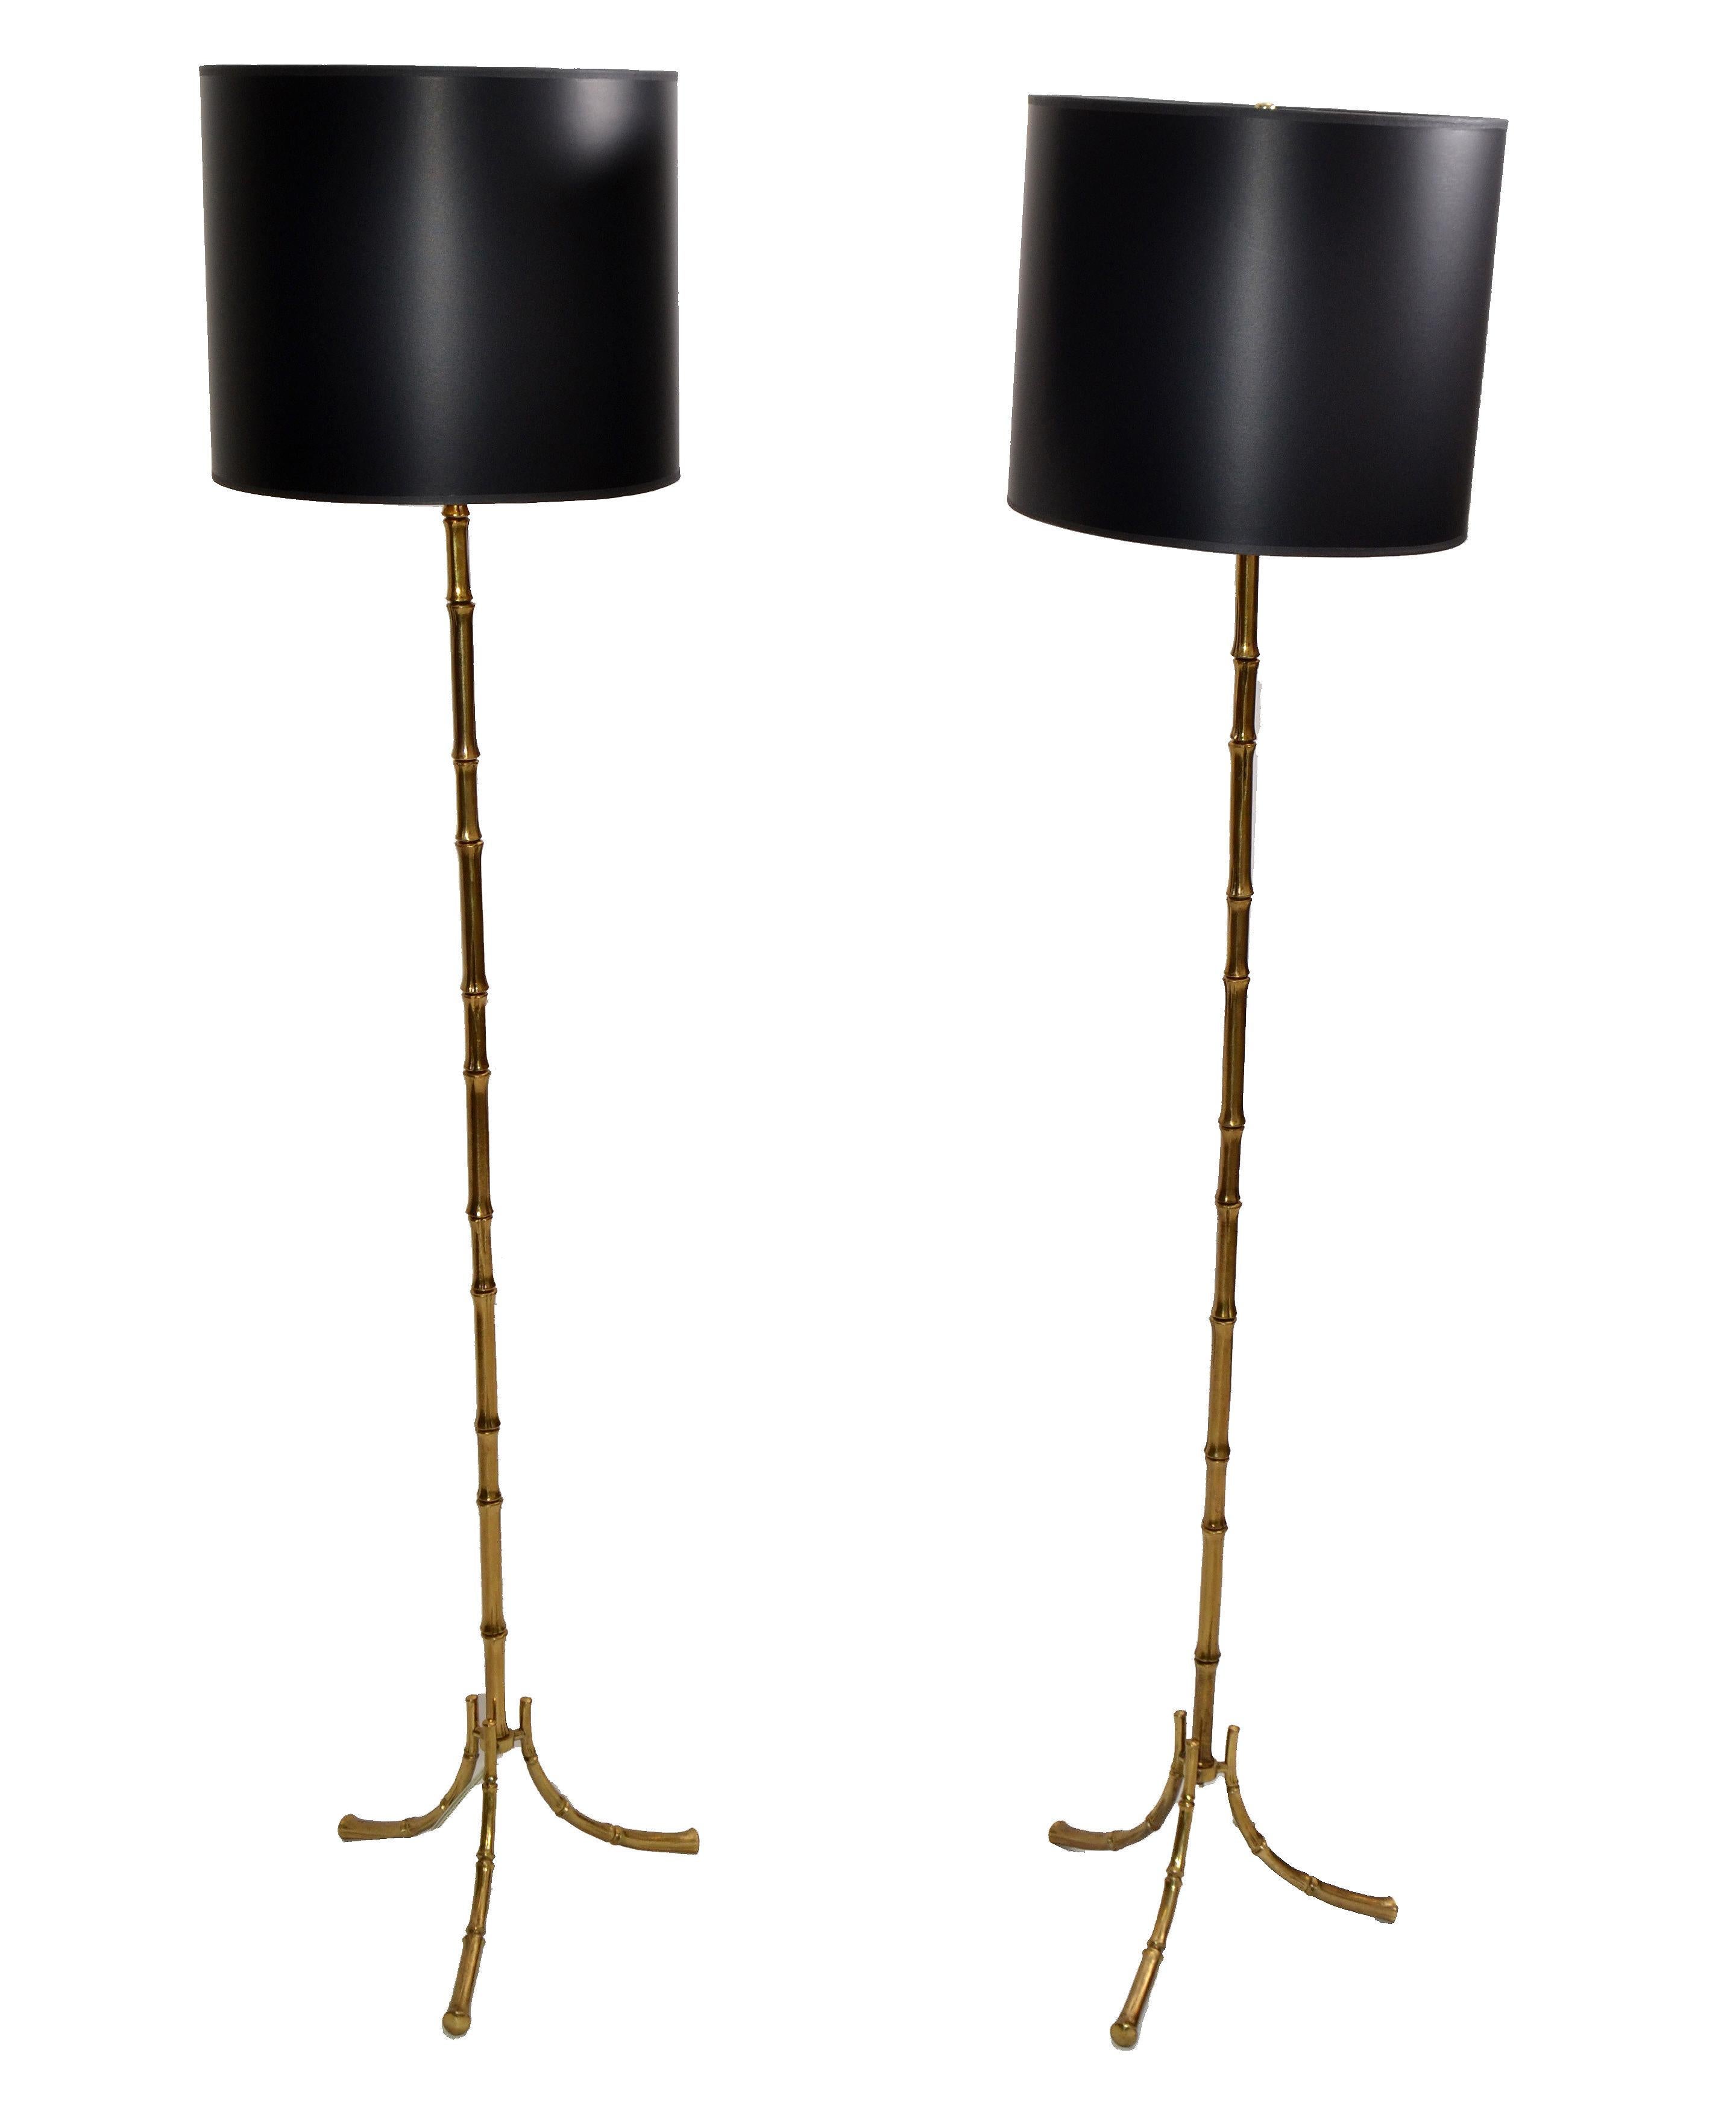 Maison Baguès French Hollywood Regency Bronze Faux Bamboo Floor Lamp 1960 - Pair For Sale 9